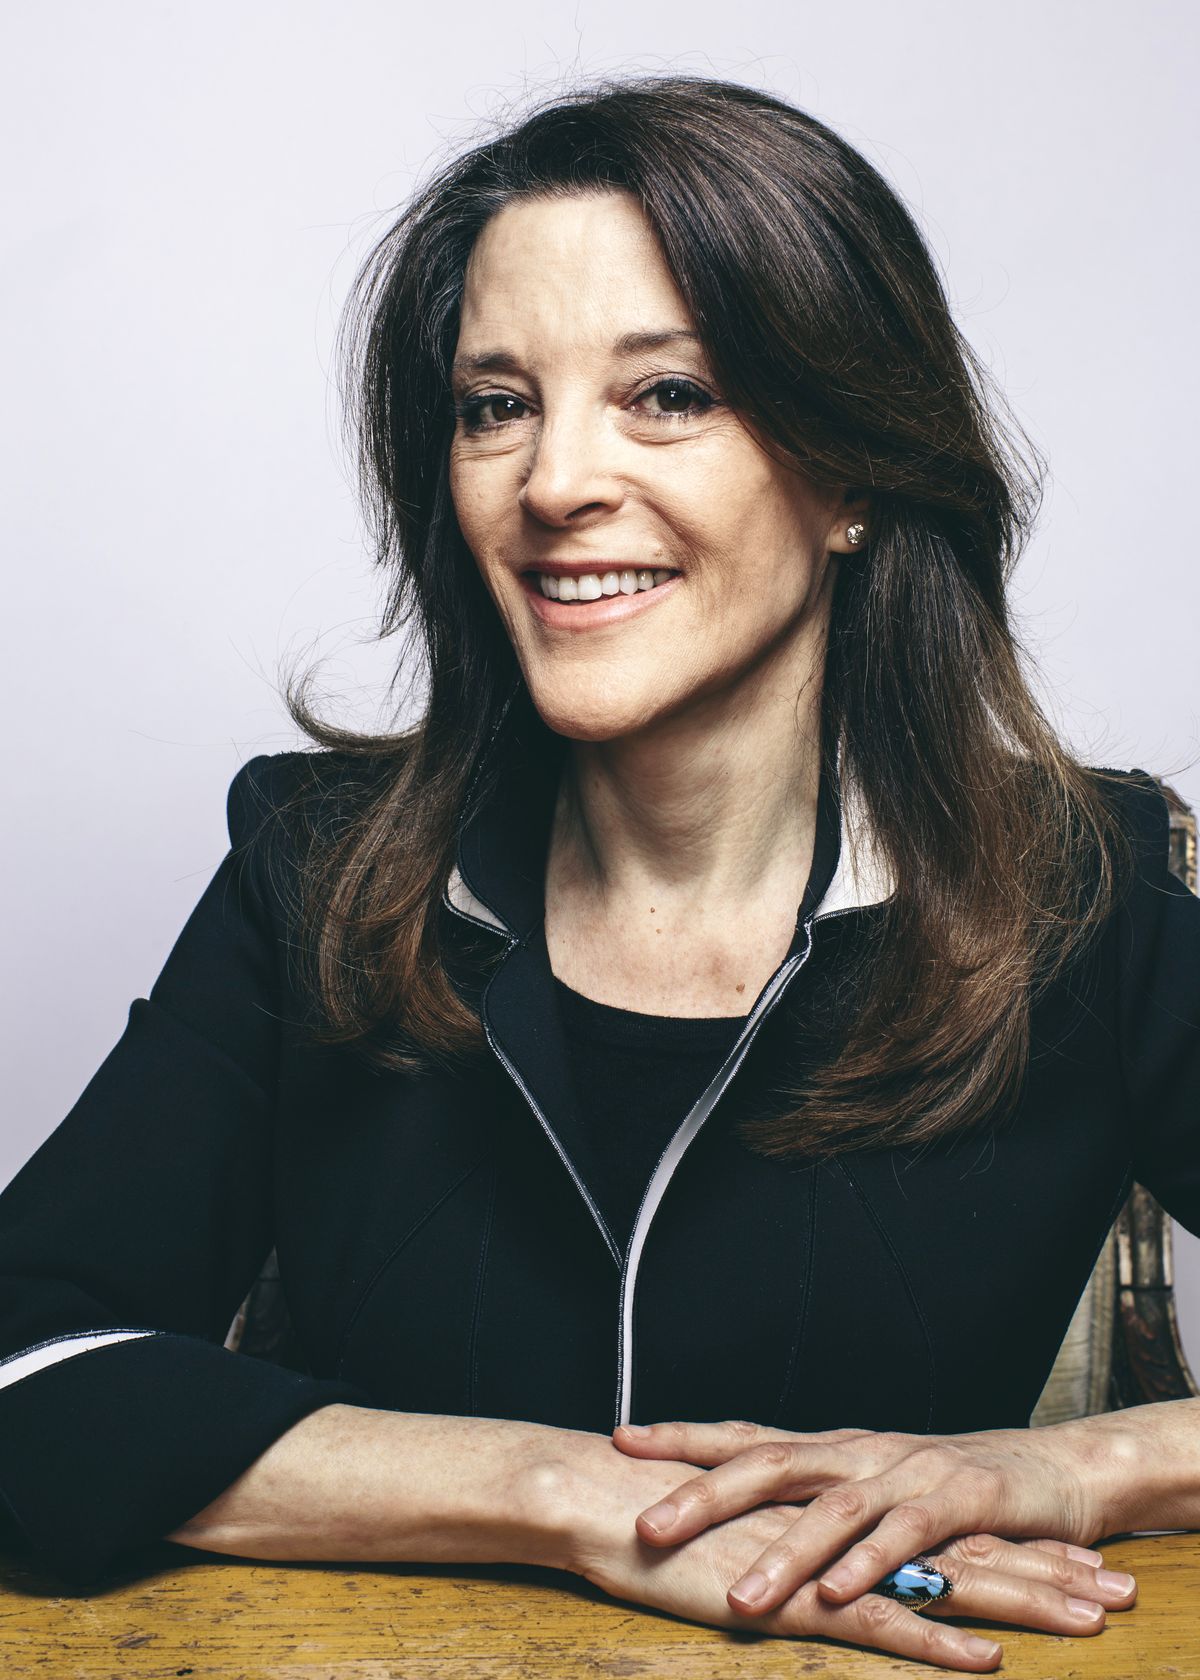 Everything You Need To Know About Marianne Williamson The Kardashian Approved Aids Activist